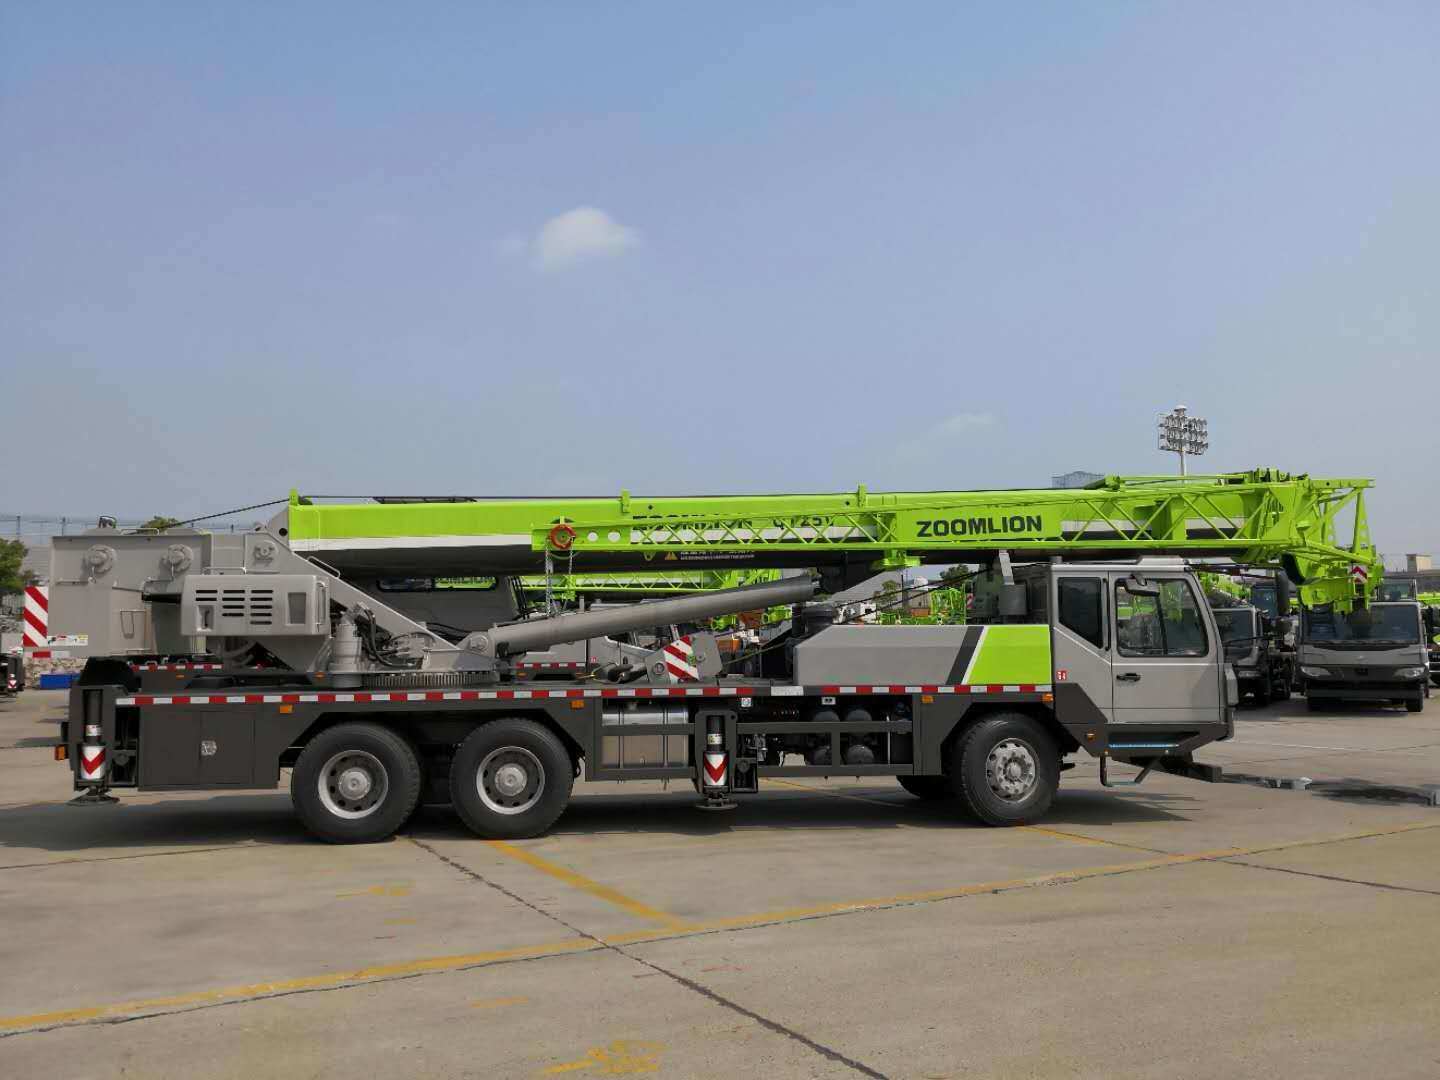 Zoomlion 25t Qy25V552 Telescopic Arm Pickup Truck Crane in Stock for Sale